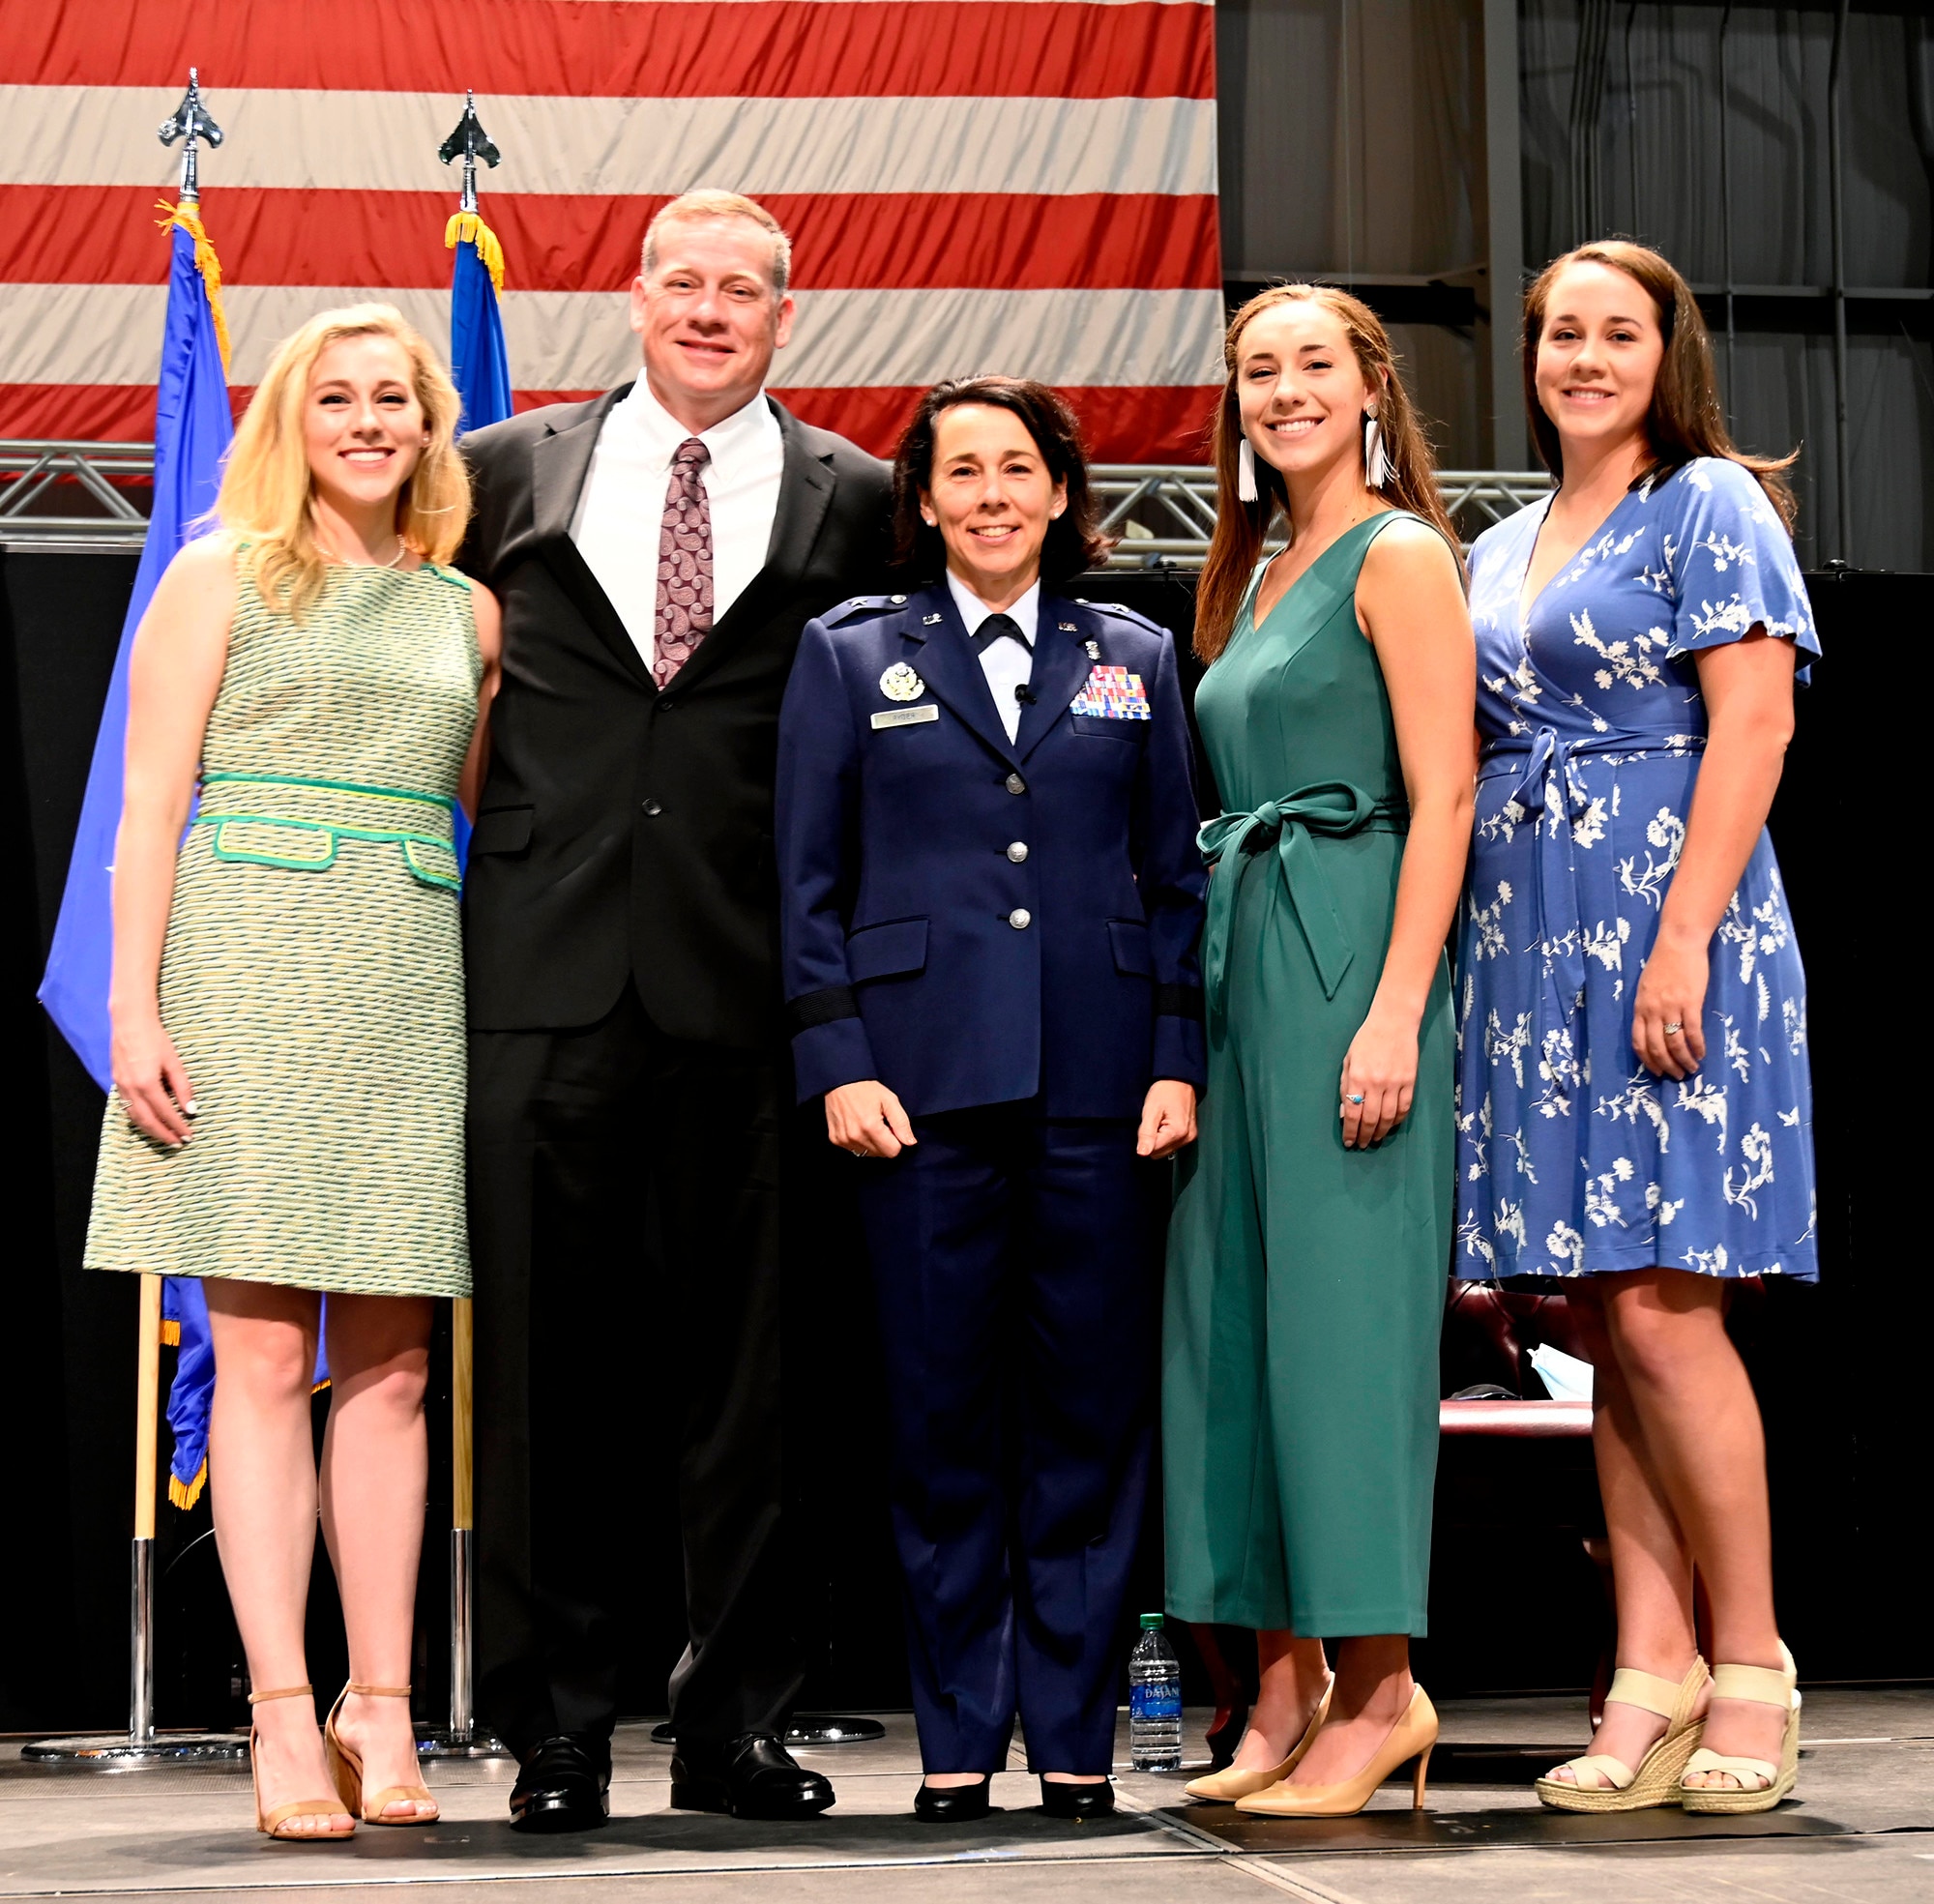 Brig. Gen. Jeannine Ryder's family stands by her as she accepts her new rank, Aug. 3, 2020 at the National Museum of the United States Air Force, Wright-Patterson Air Force Base, Ohio. (U.S. Air Force photo/Darrius Parker)